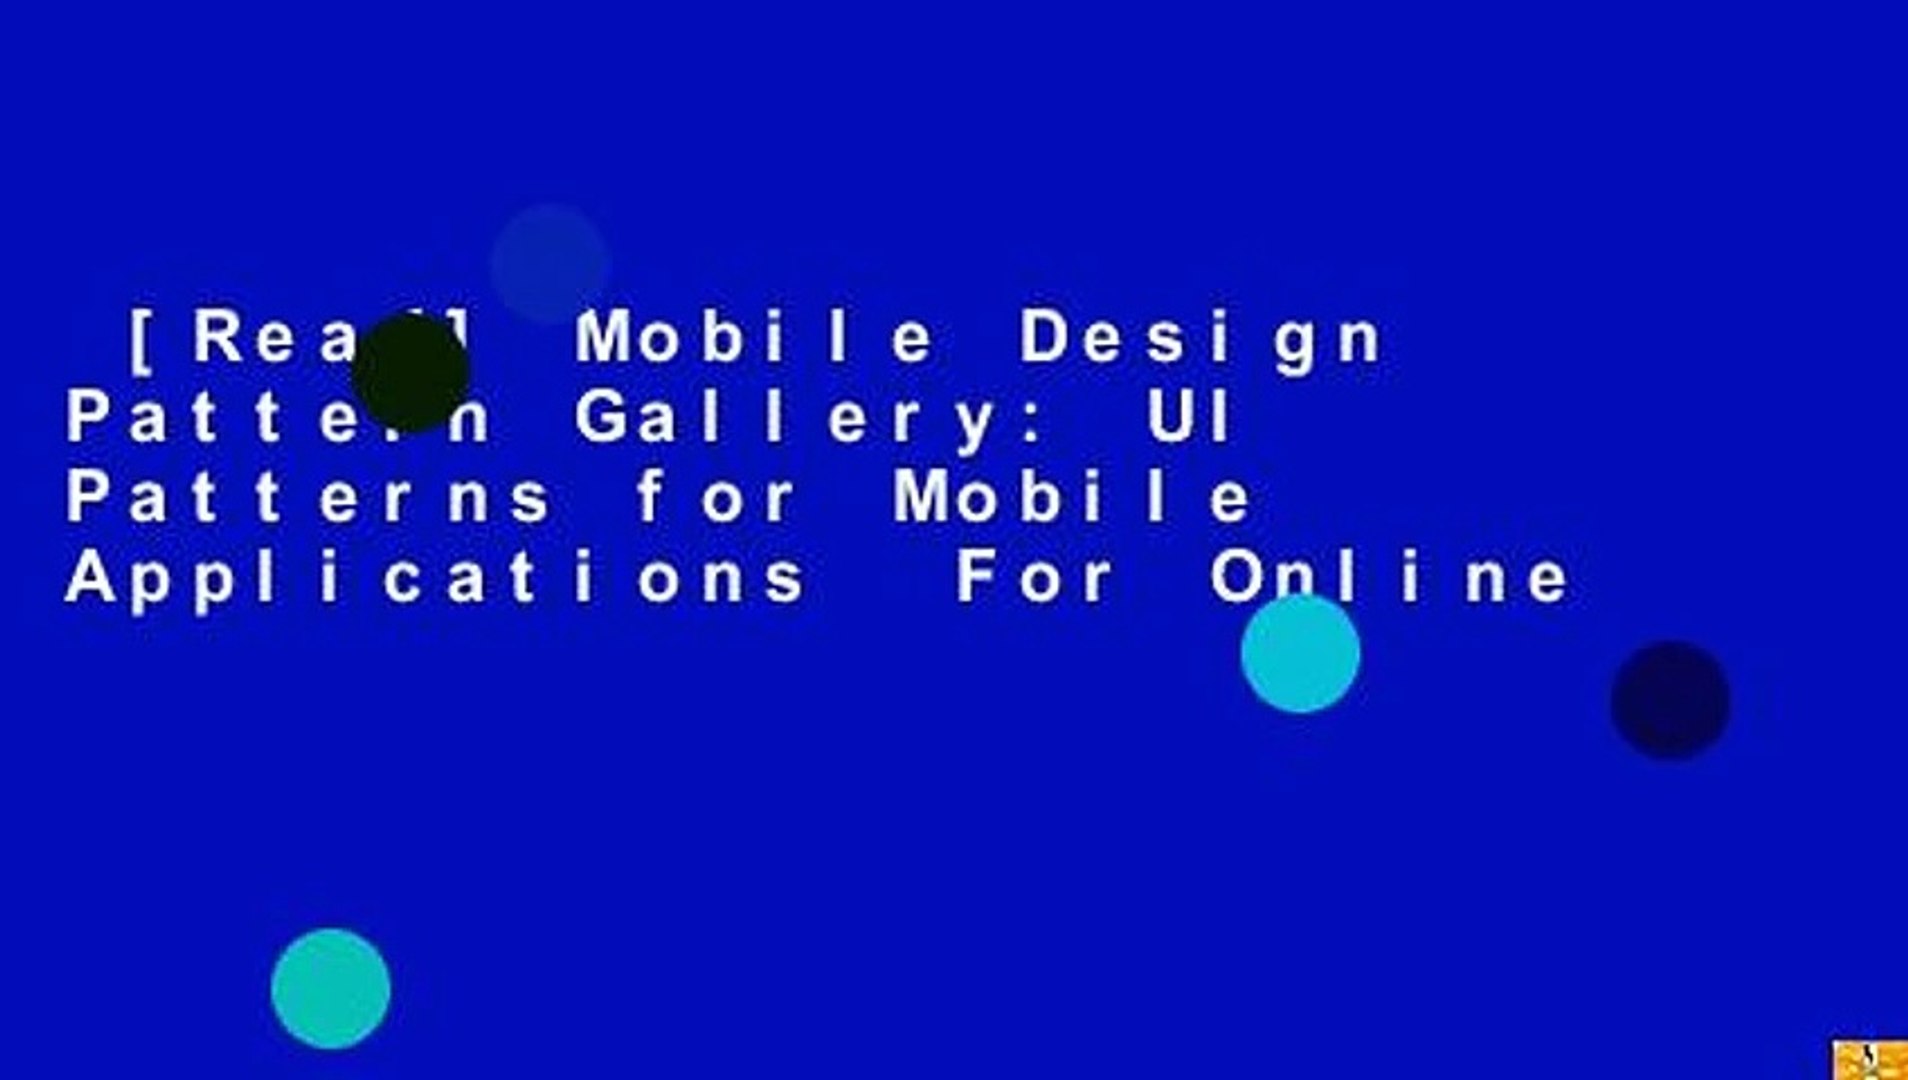 [Read] Mobile Design Pattern Gallery: UI Patterns for Mobile Applications  For Online